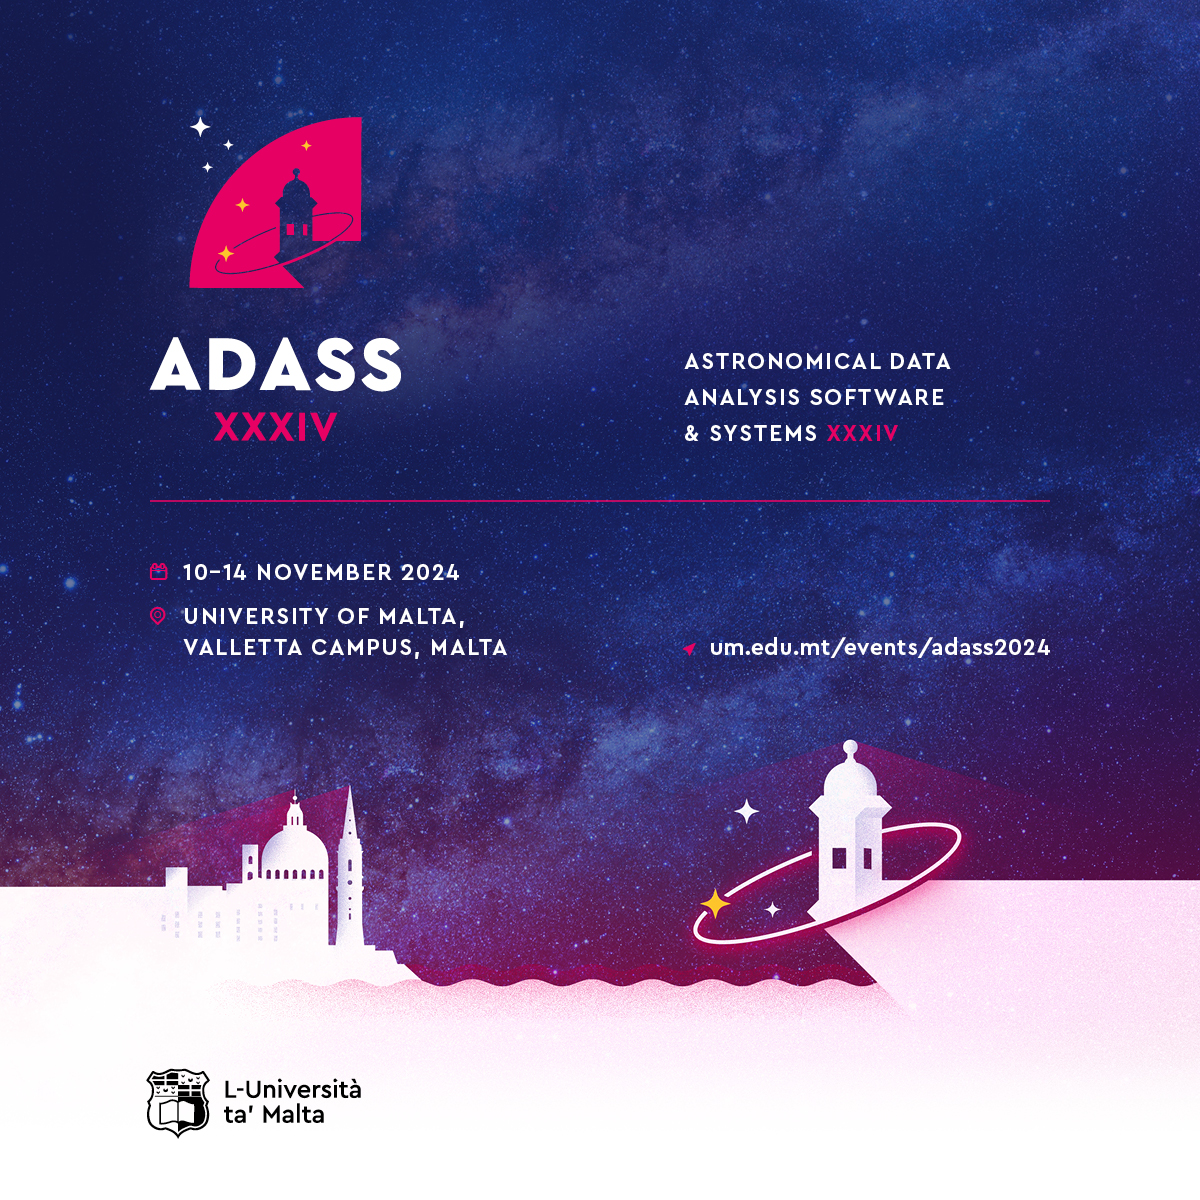 Astronomical Data Analysis Software and Systems 2024. Valletta. 10-14 November 2024